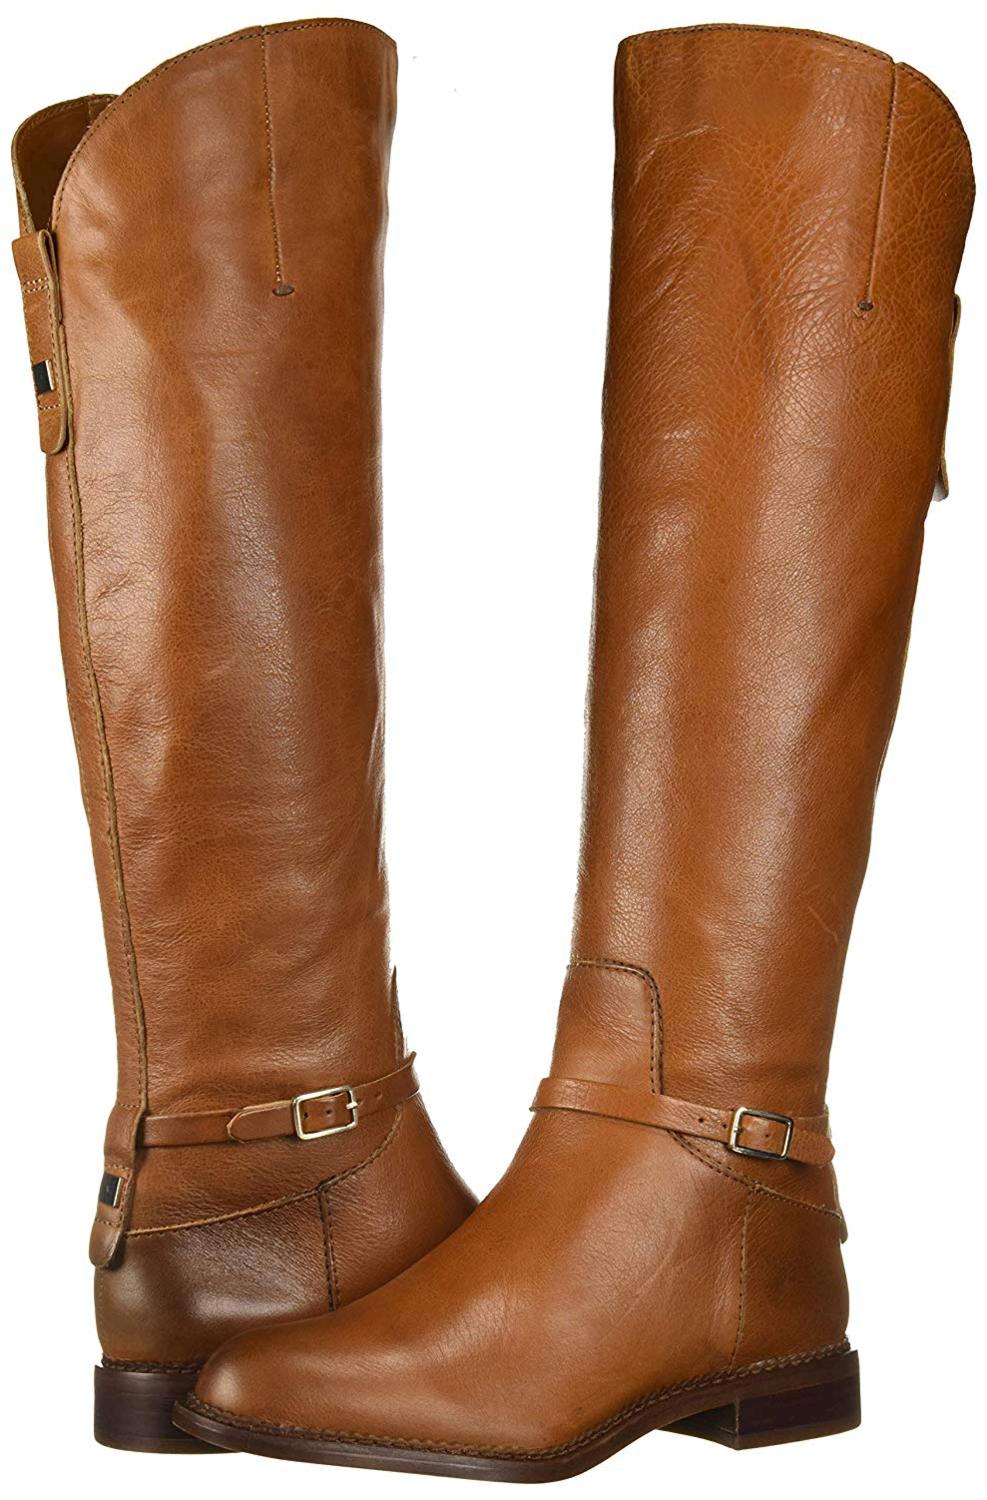 Franco Sarto Women's Haylie Knee High Boot, Cognac Leather, Size 9.0 ...